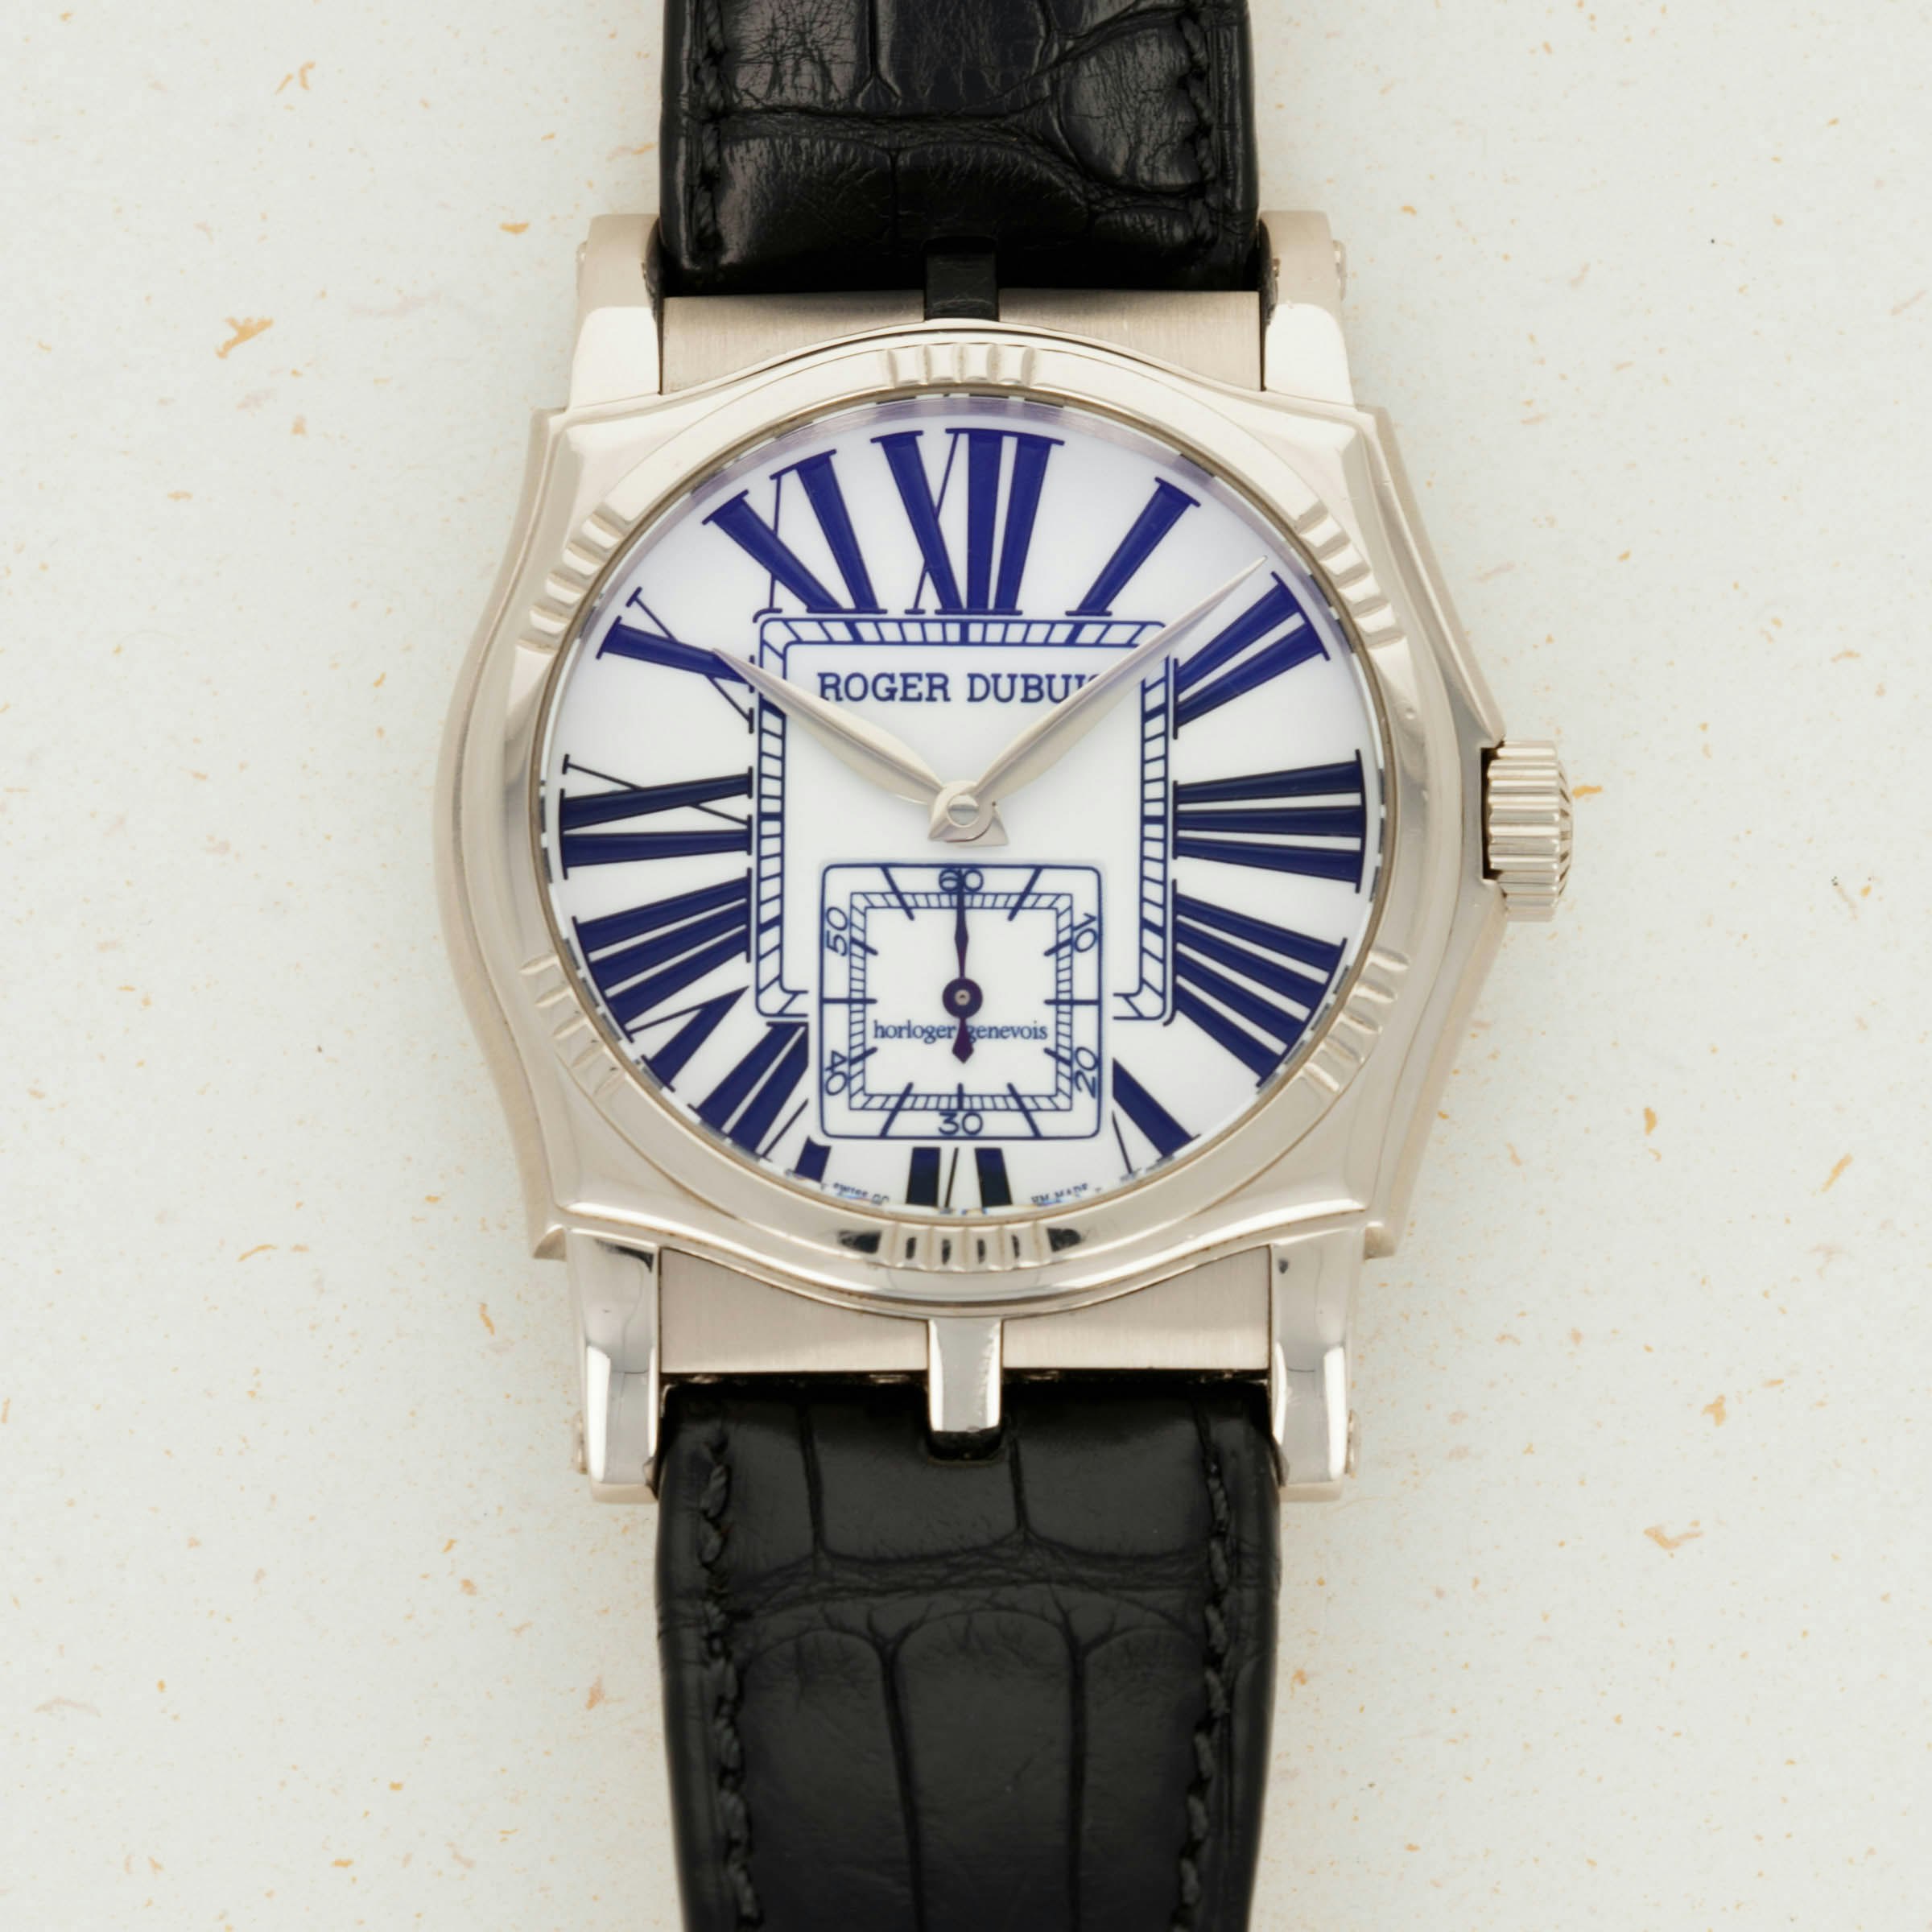 Thumbnail for Roger Dubuis Sympathie SY40 White Gold